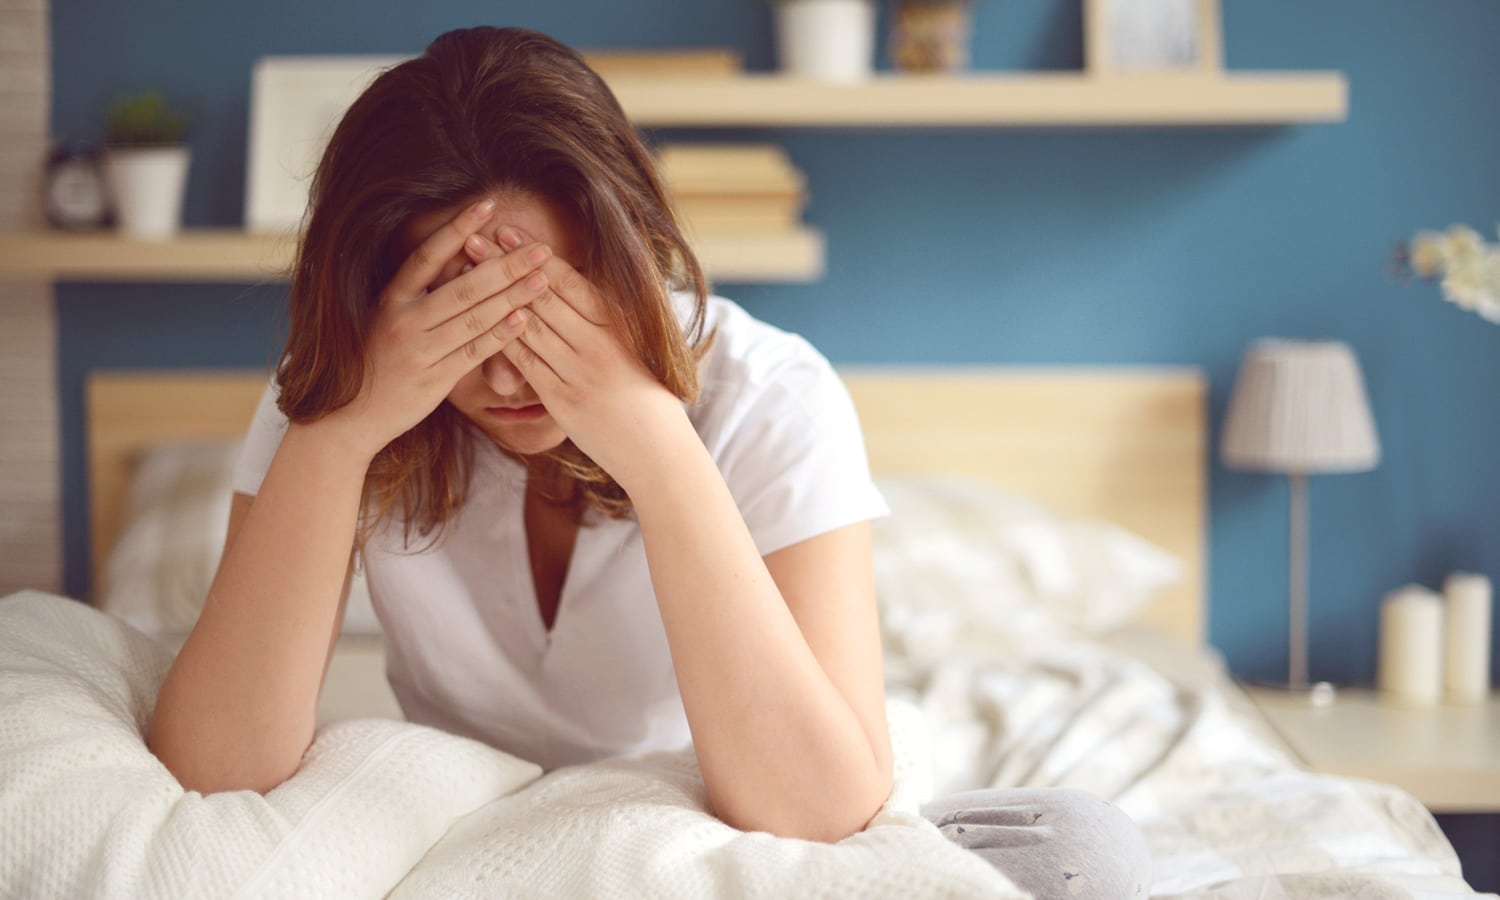 Managing Nausea With Cannabis: What You Need To Know